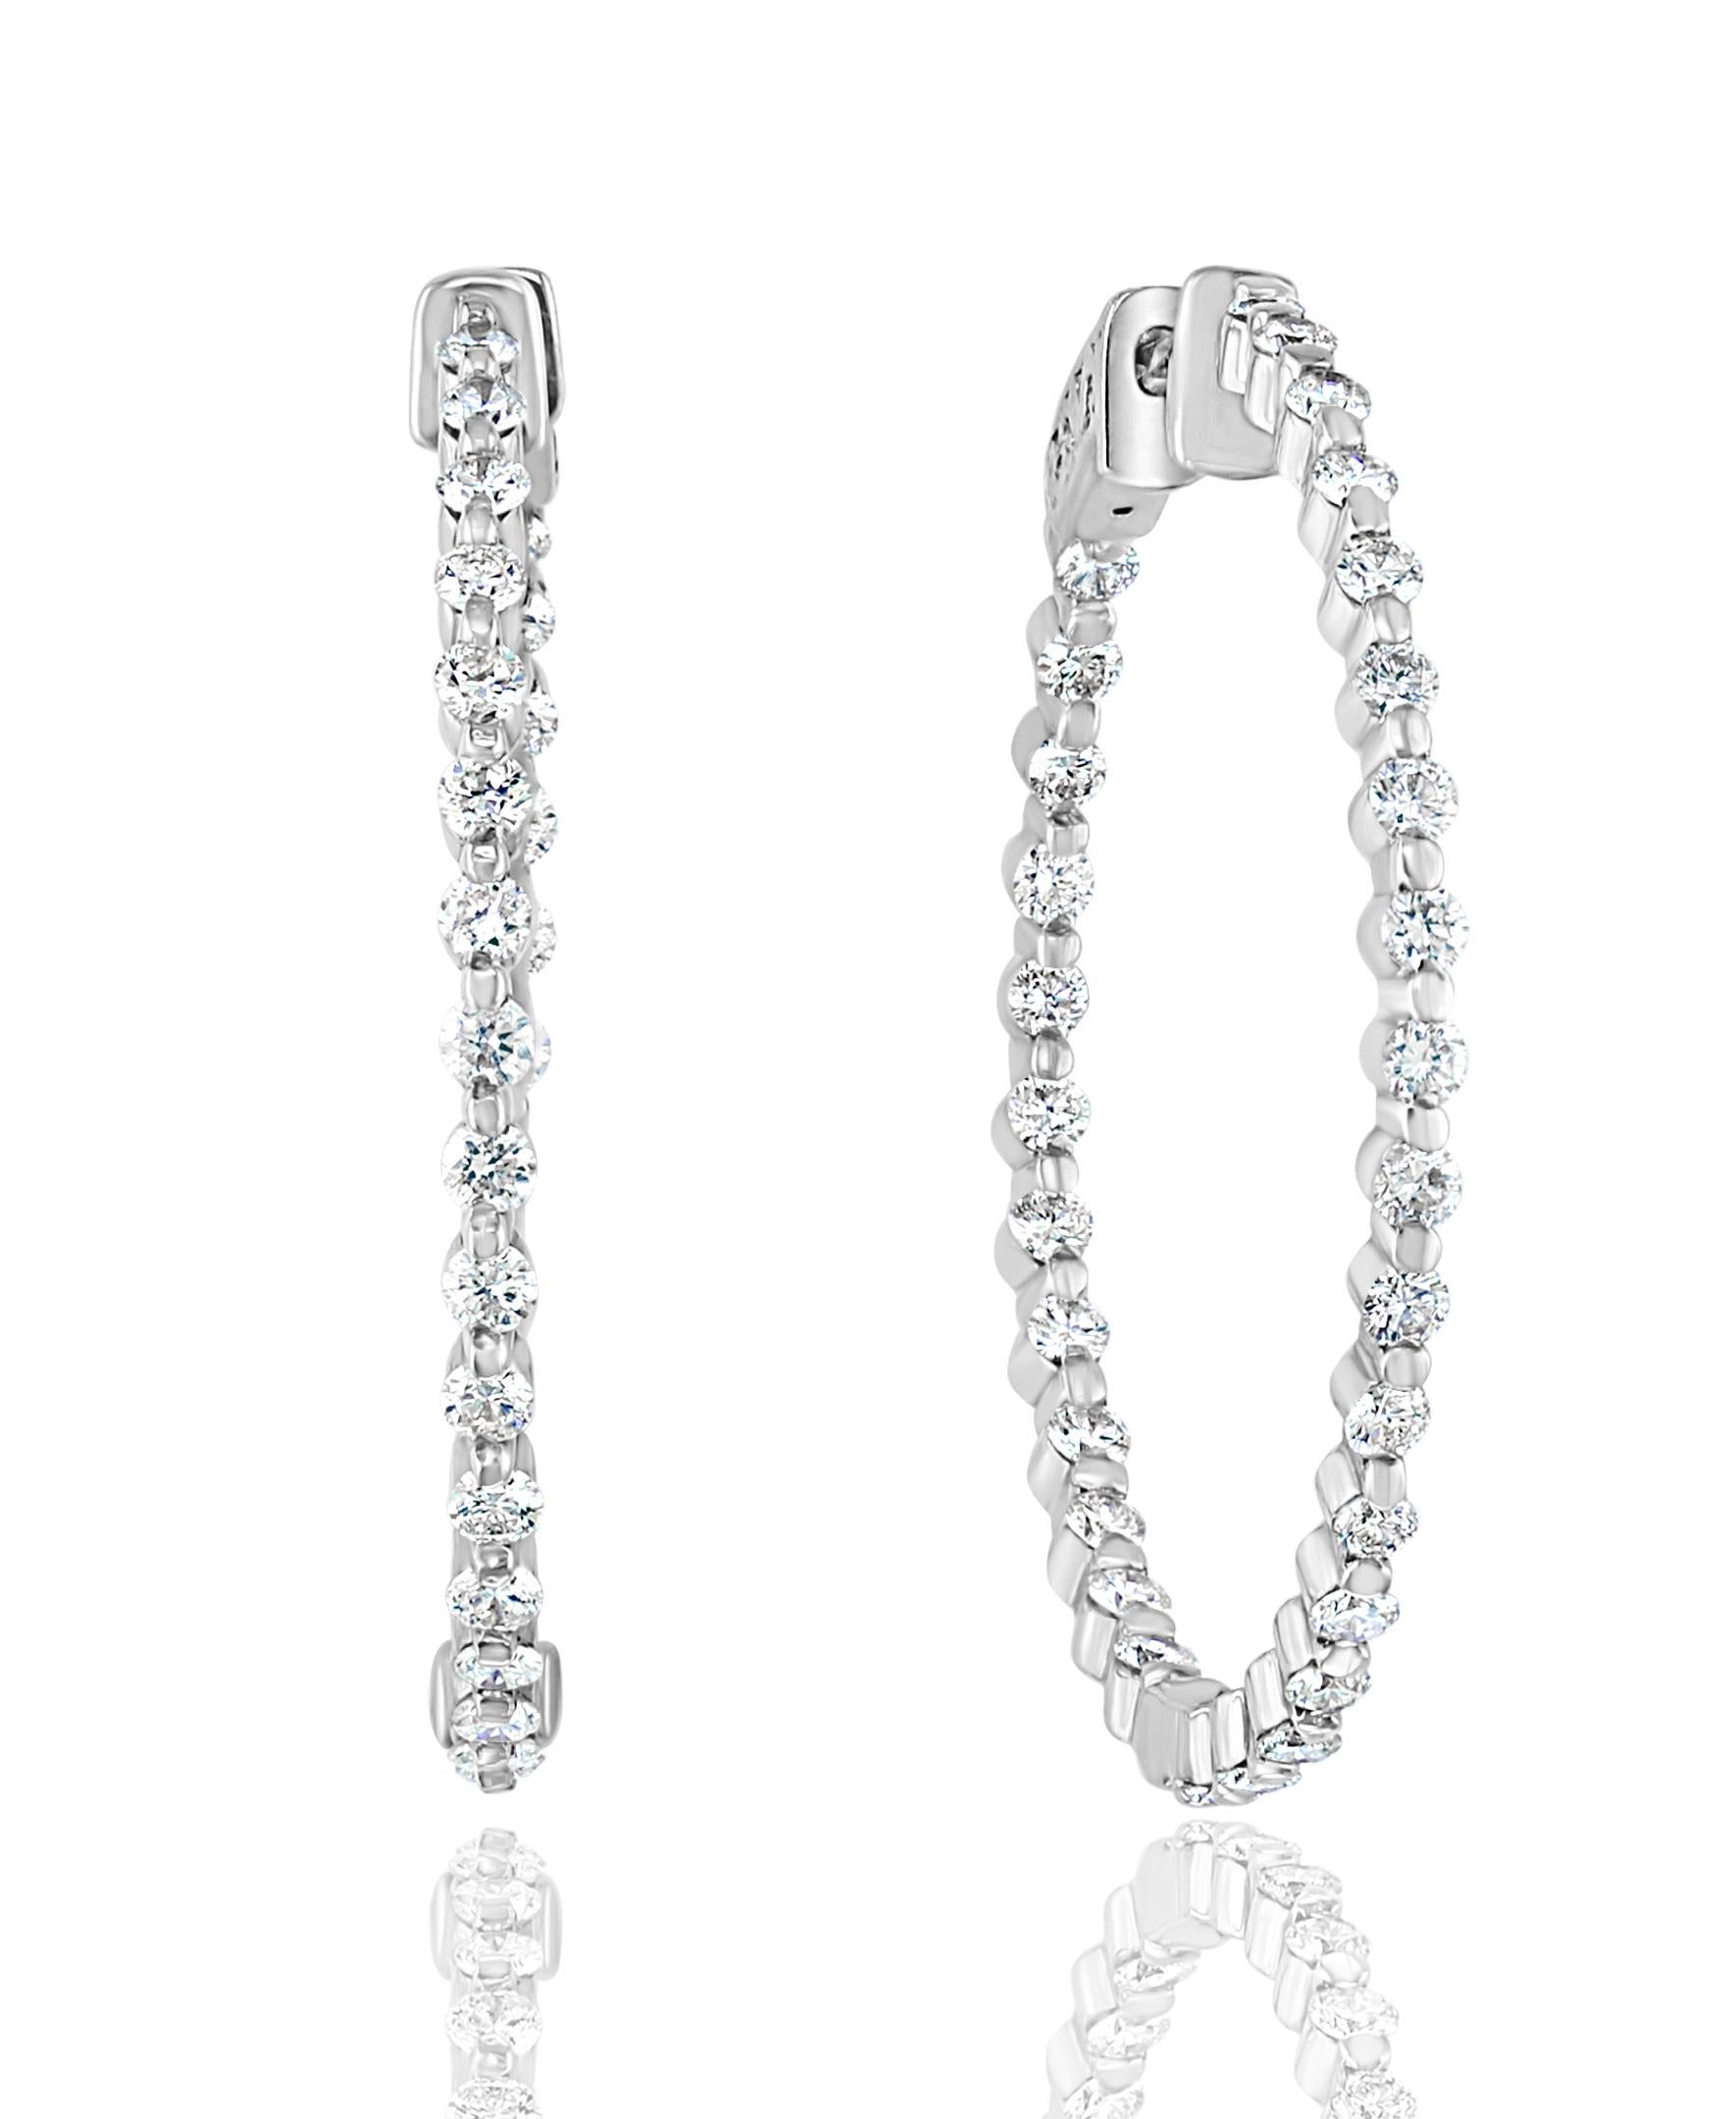 Gorgeous and classic diamond hoop earrings. Features dazzling brilliant cut round diamonds set in shared prongs to maximize the brilliance of the diamonds. The total weight of the 52 diamonds is 2.05 carats. Made in 14k white gold. 